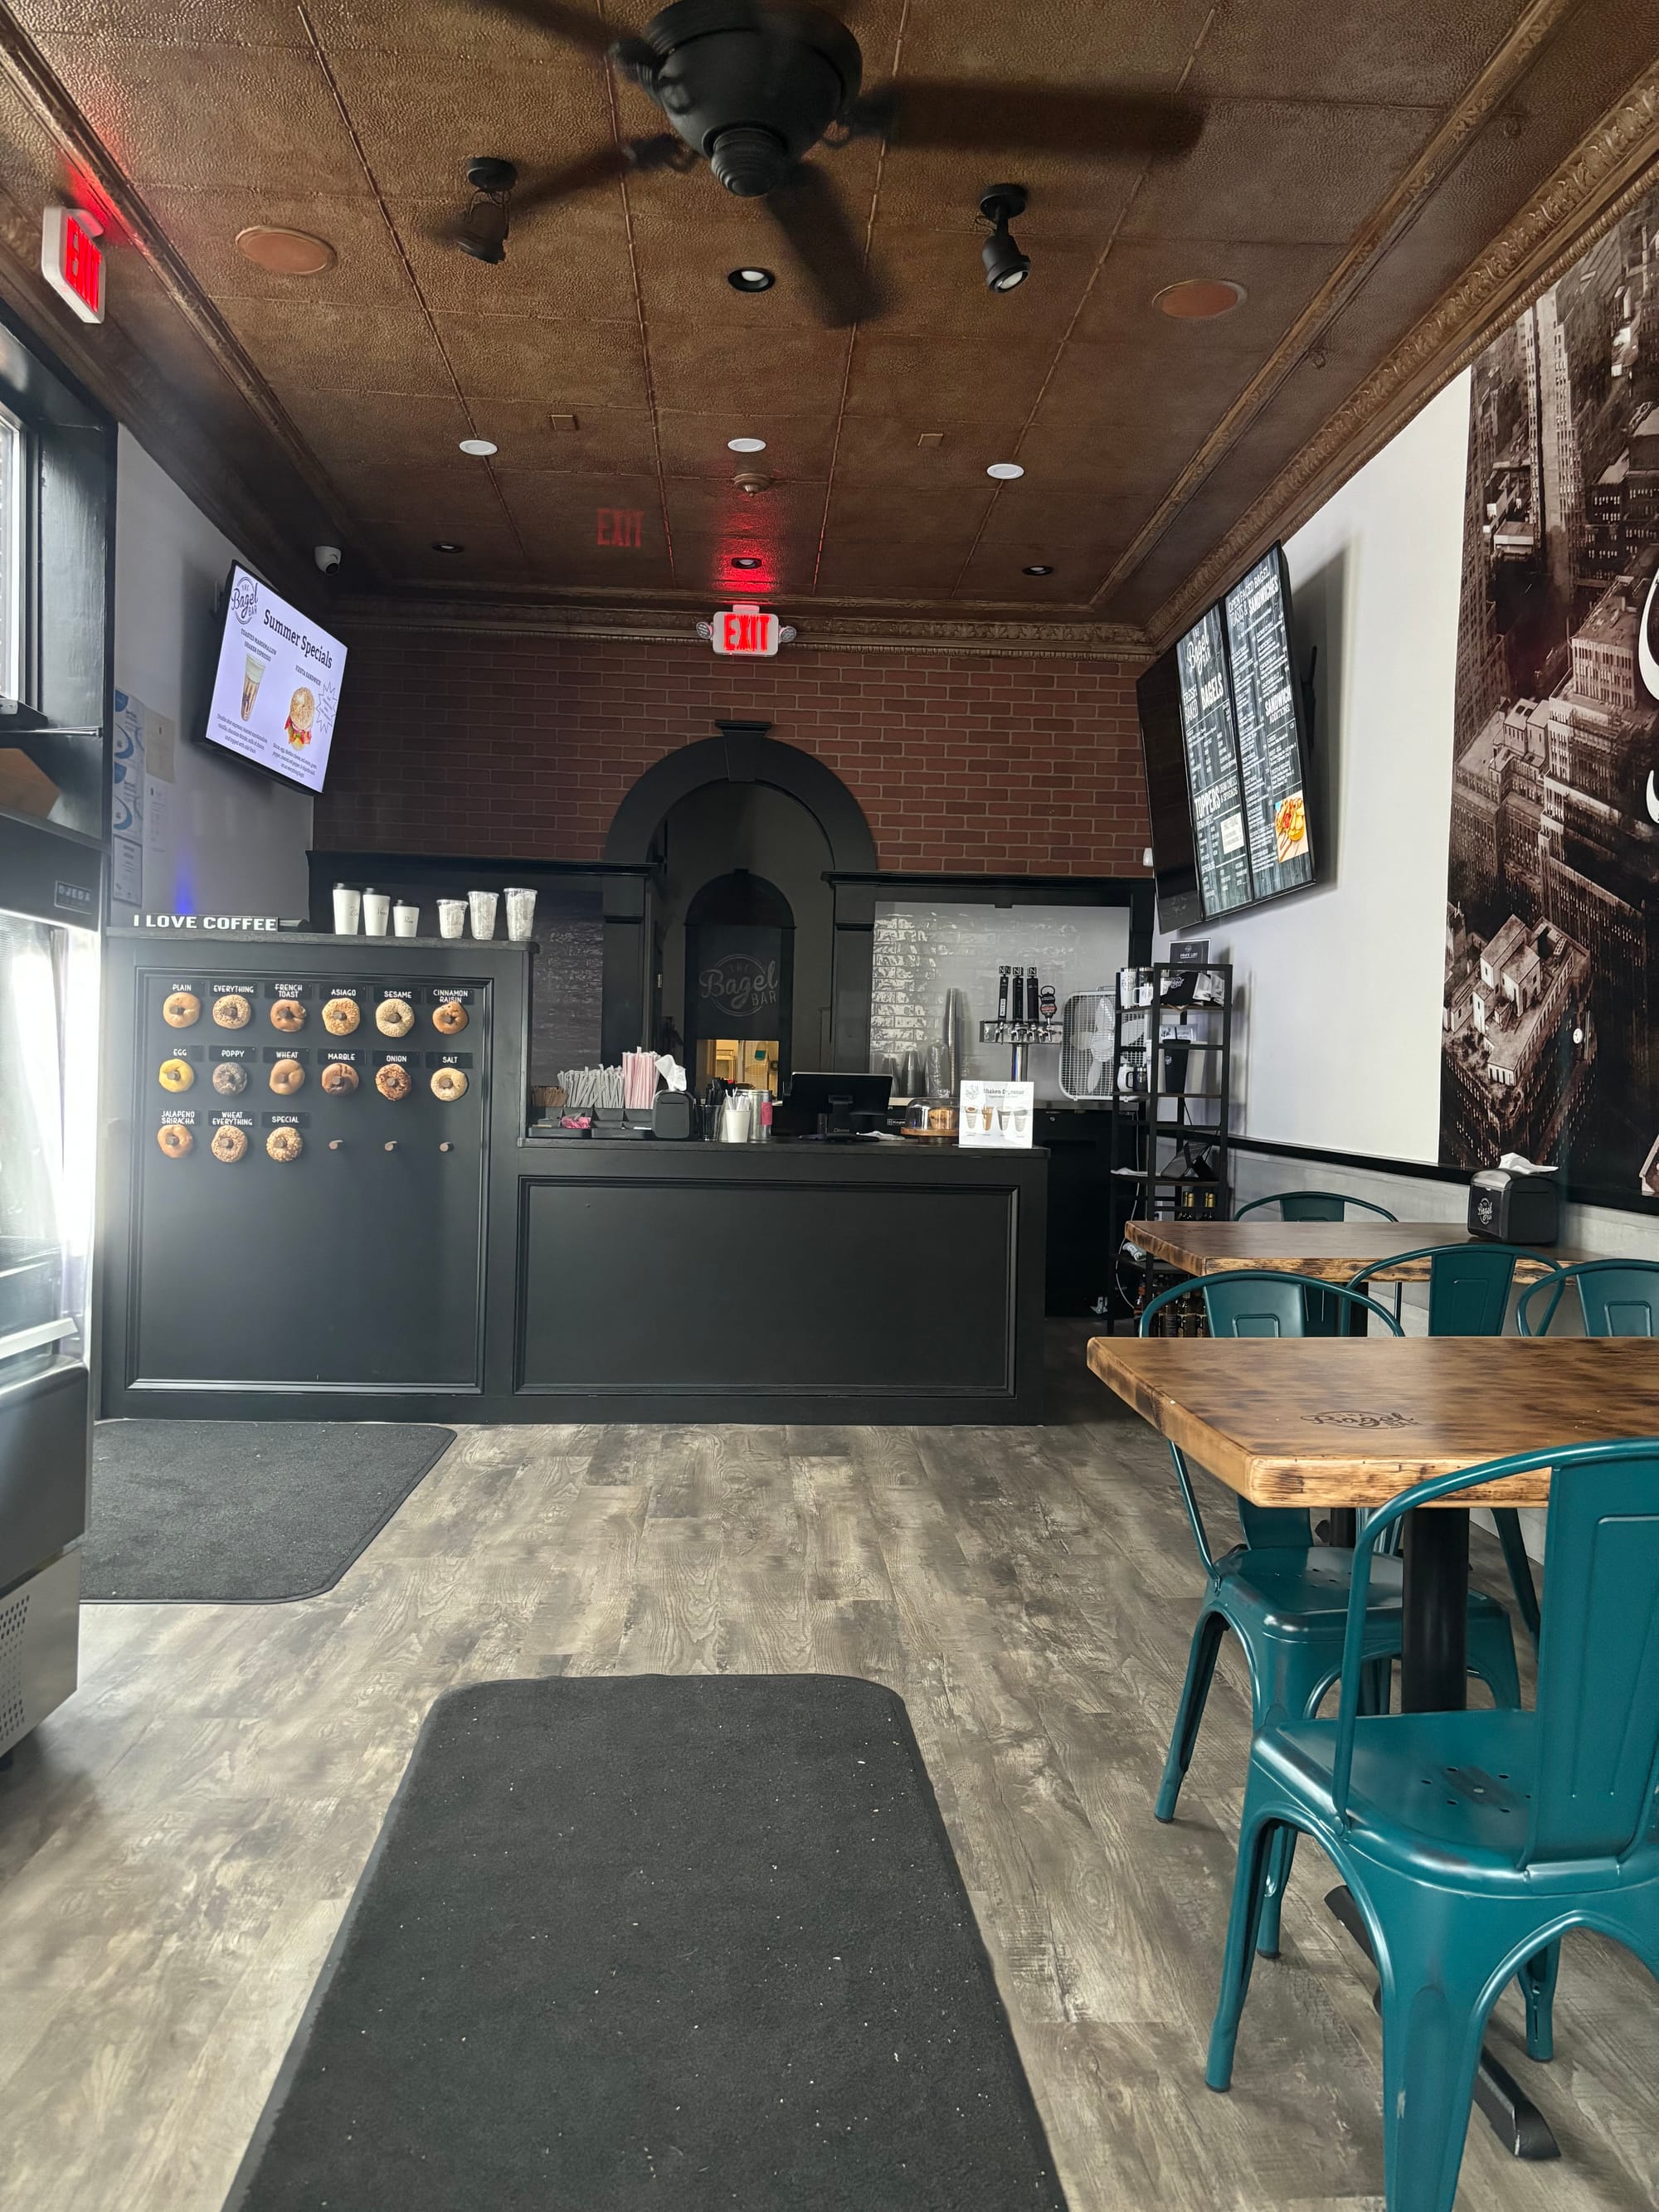 Bagel Bar officially opens its doors on Thompson Street